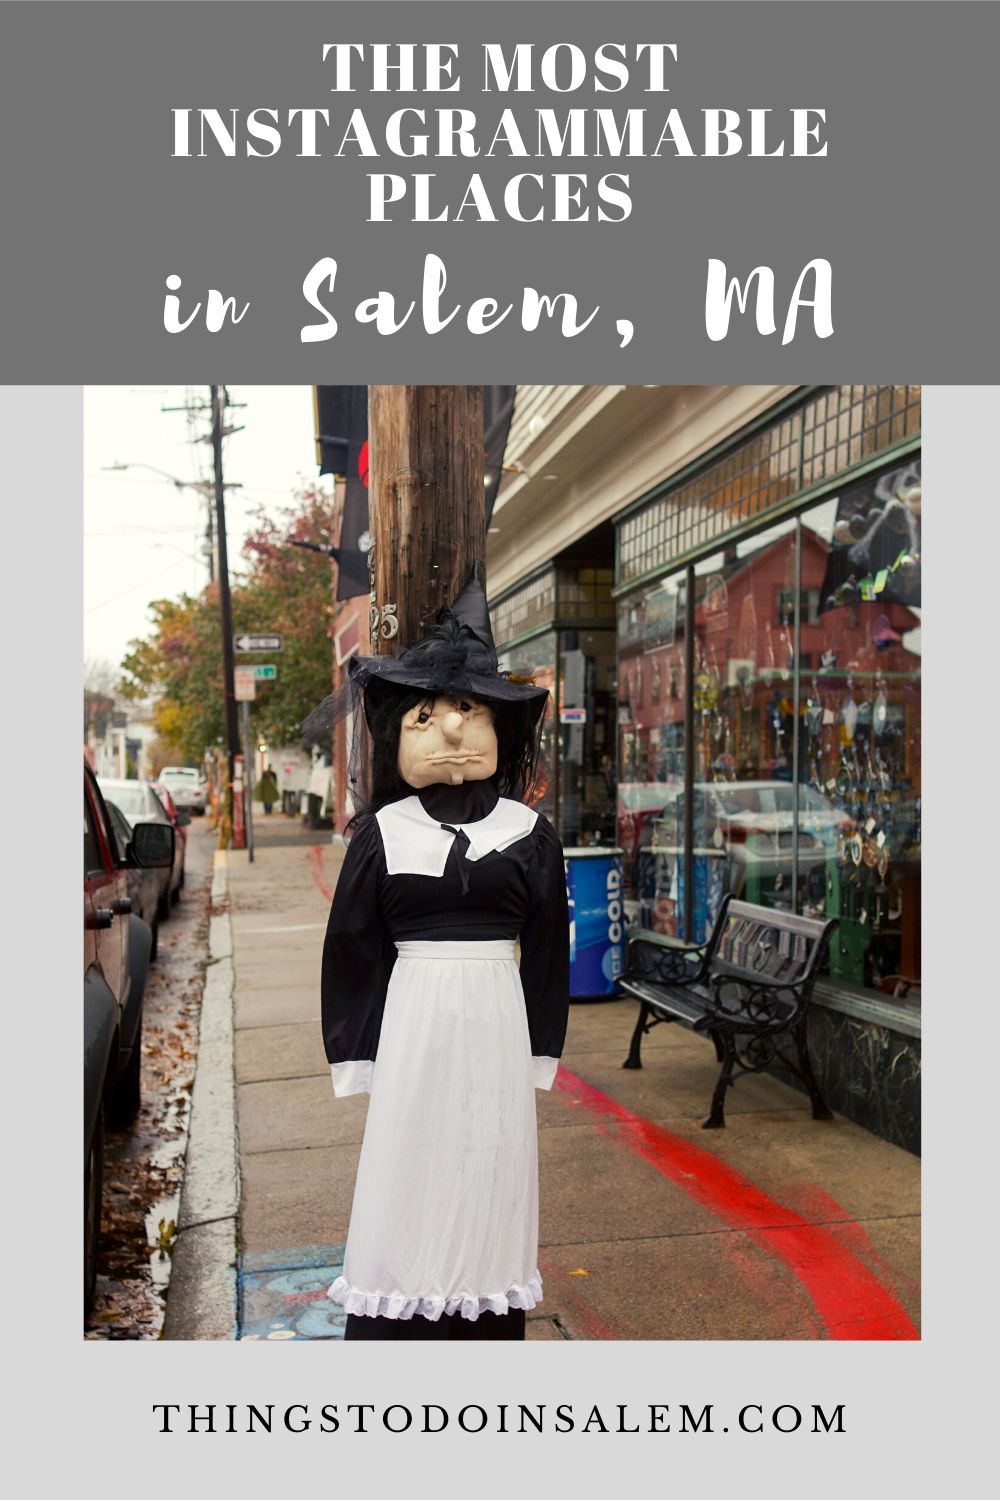 things to do in salem, most instagrammable places in salem ma